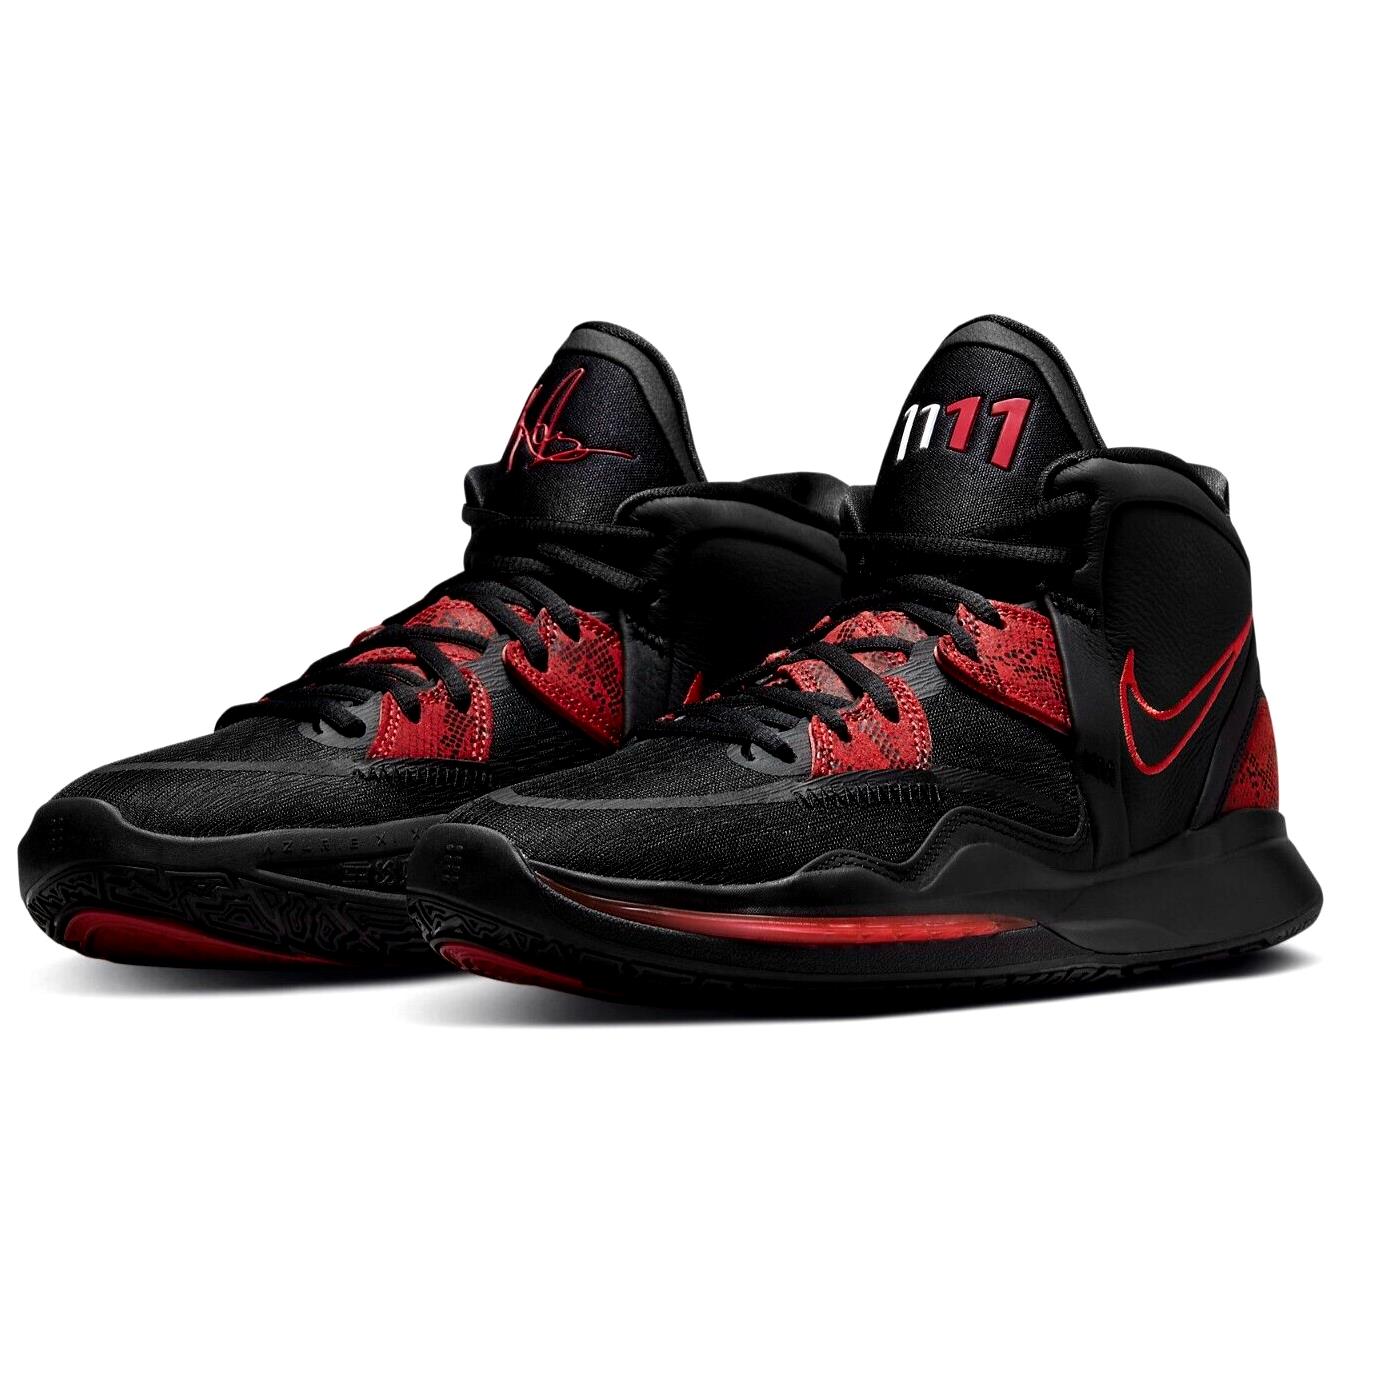 Nike Kyrie Infinity Mens Size 9.5 Sneaker Shoes CZ0204 004 Bred Black Red